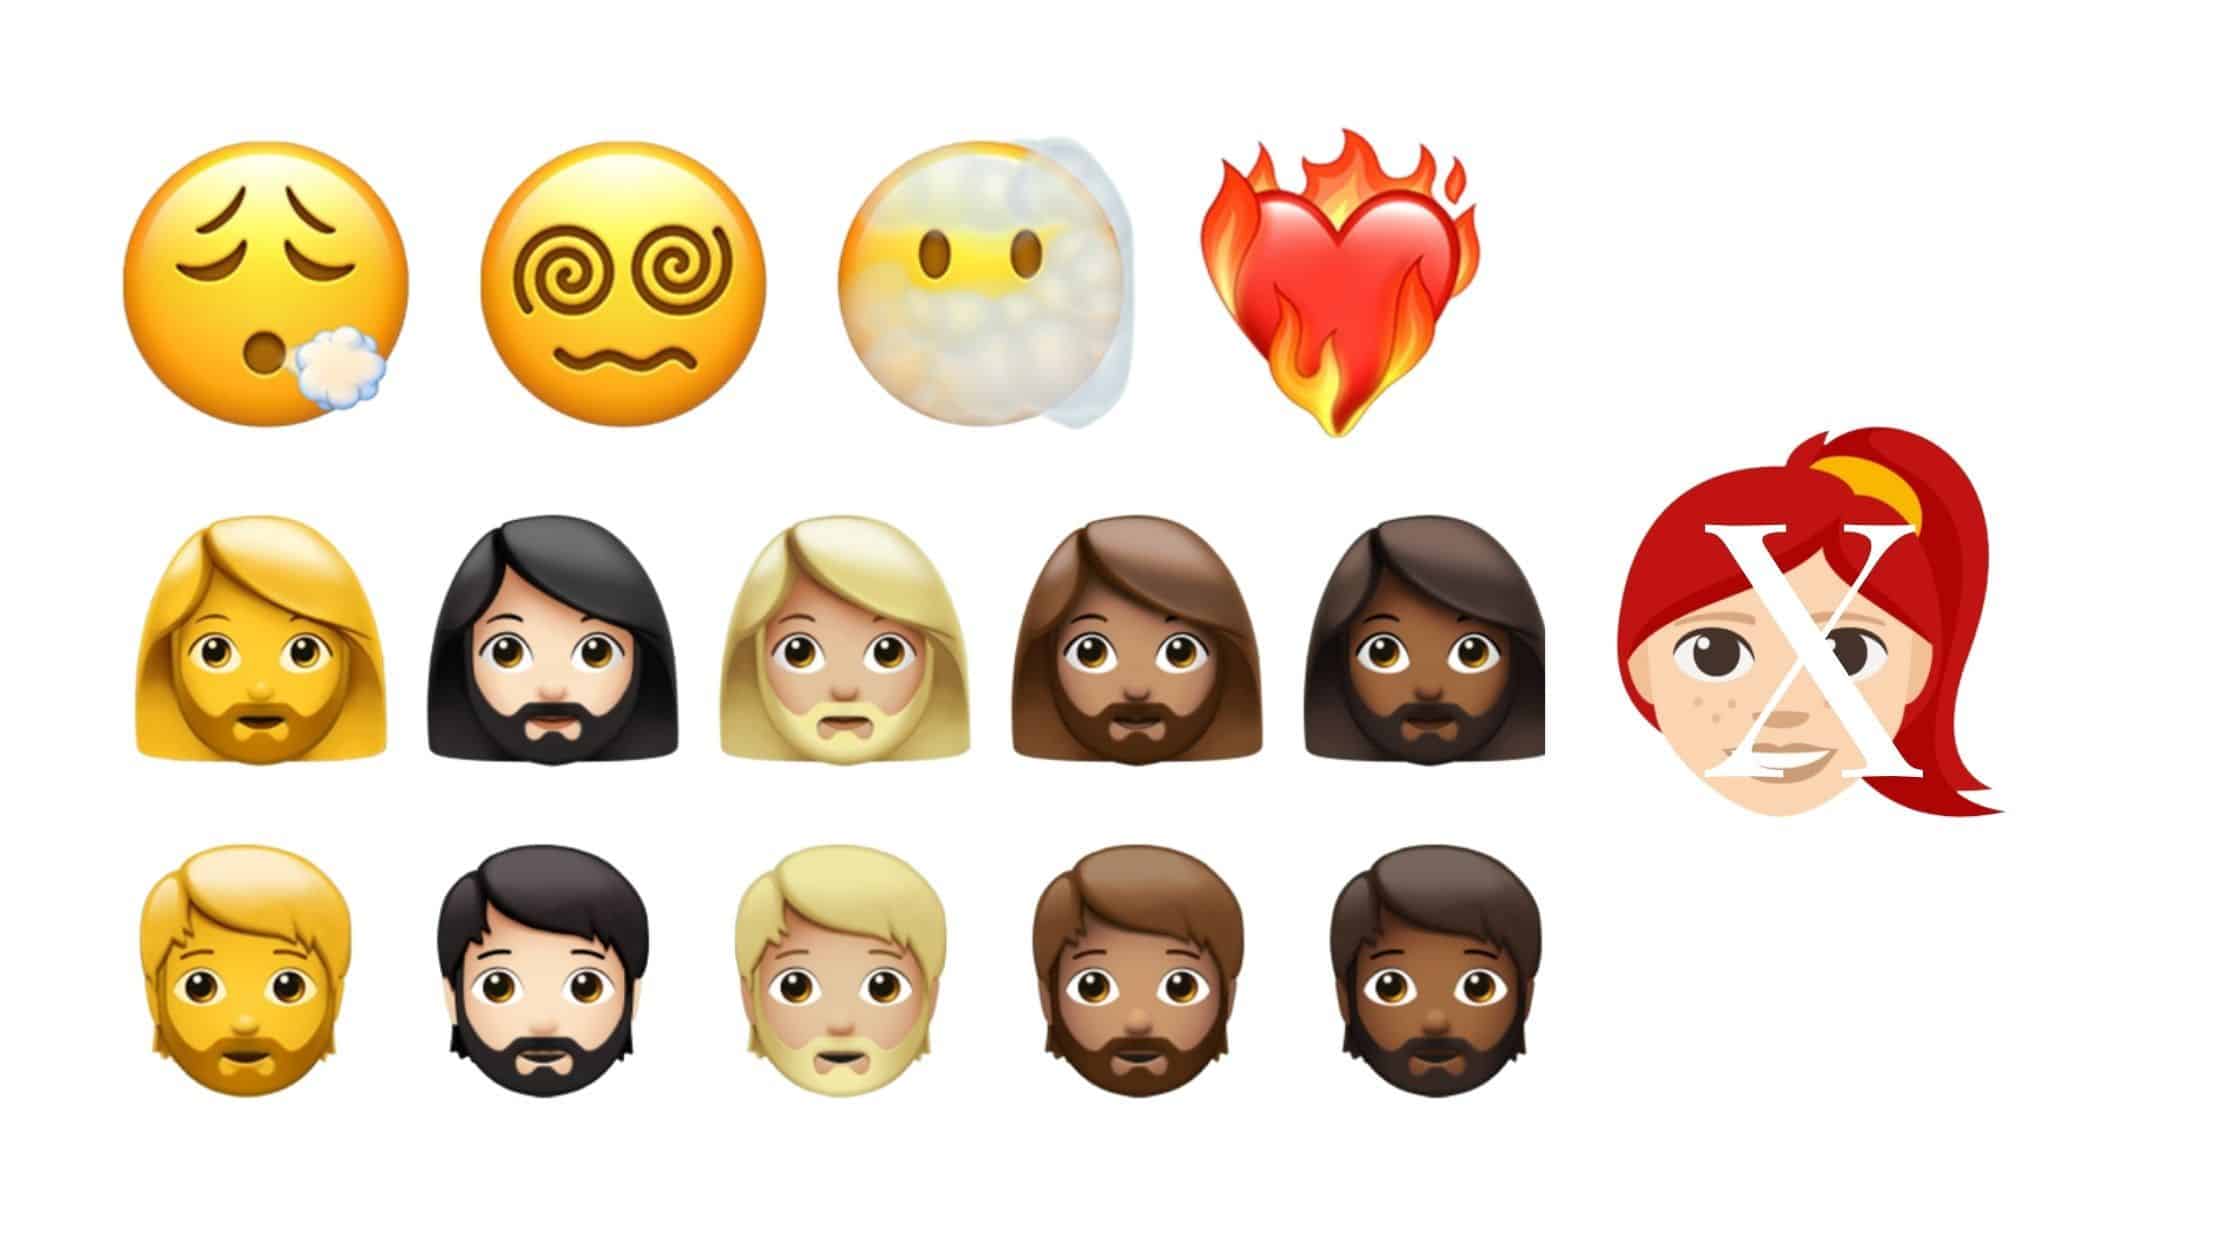 441 New Emojis Released But Redheads Are Excluded